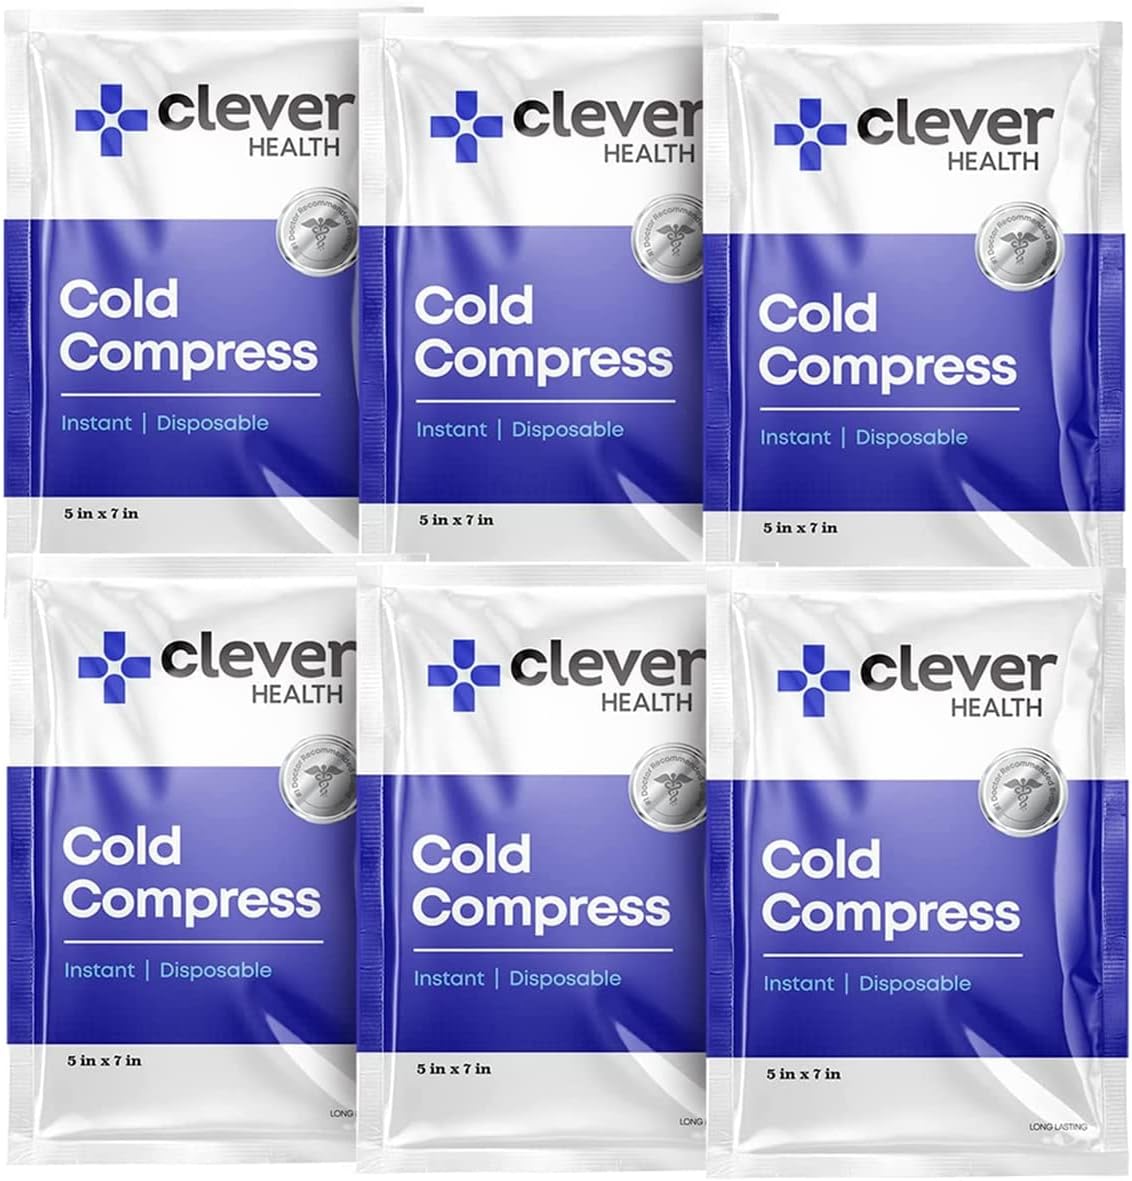 Six instant, disposable ice packs that are five by seven inches.